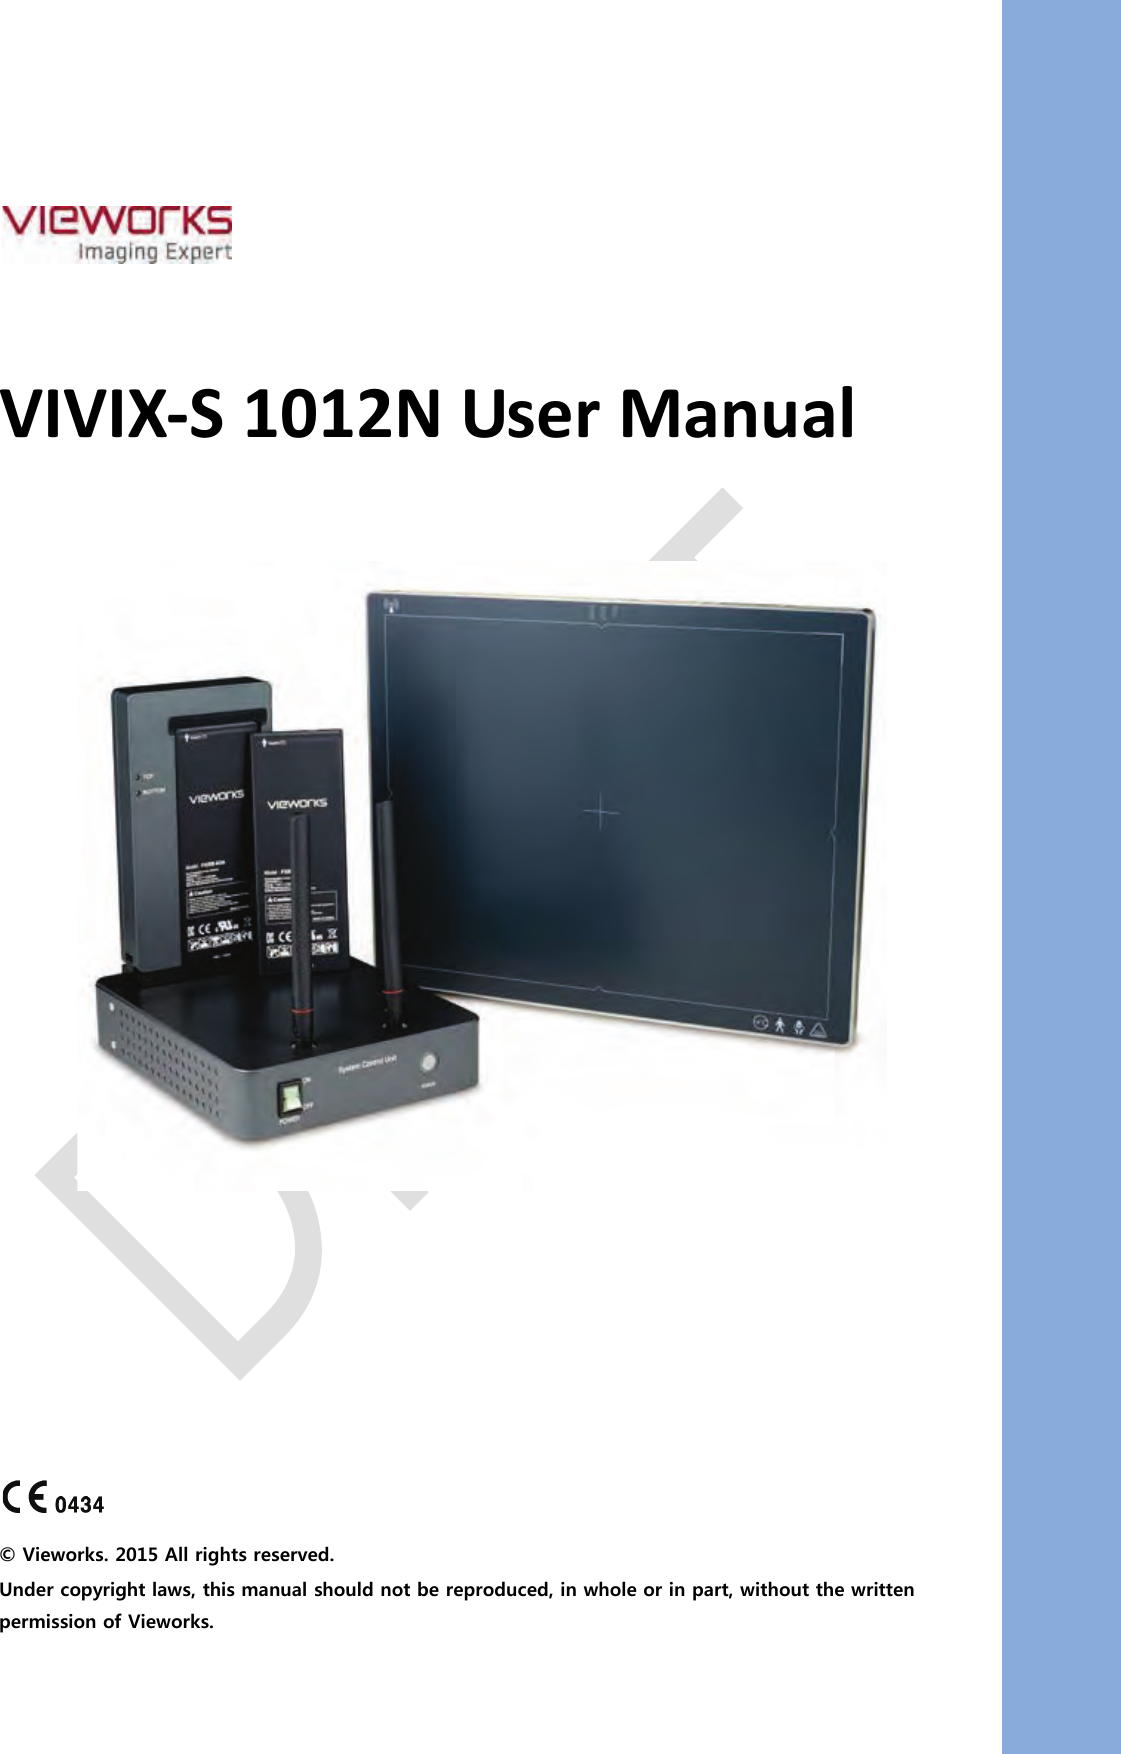       VIVIX-S 1012N User Manual               © Vieworks. 2015 All rights reserved. Under copyright laws, this manual should not be reproduced, in whole or in part, without the written permission of Vieworks. 